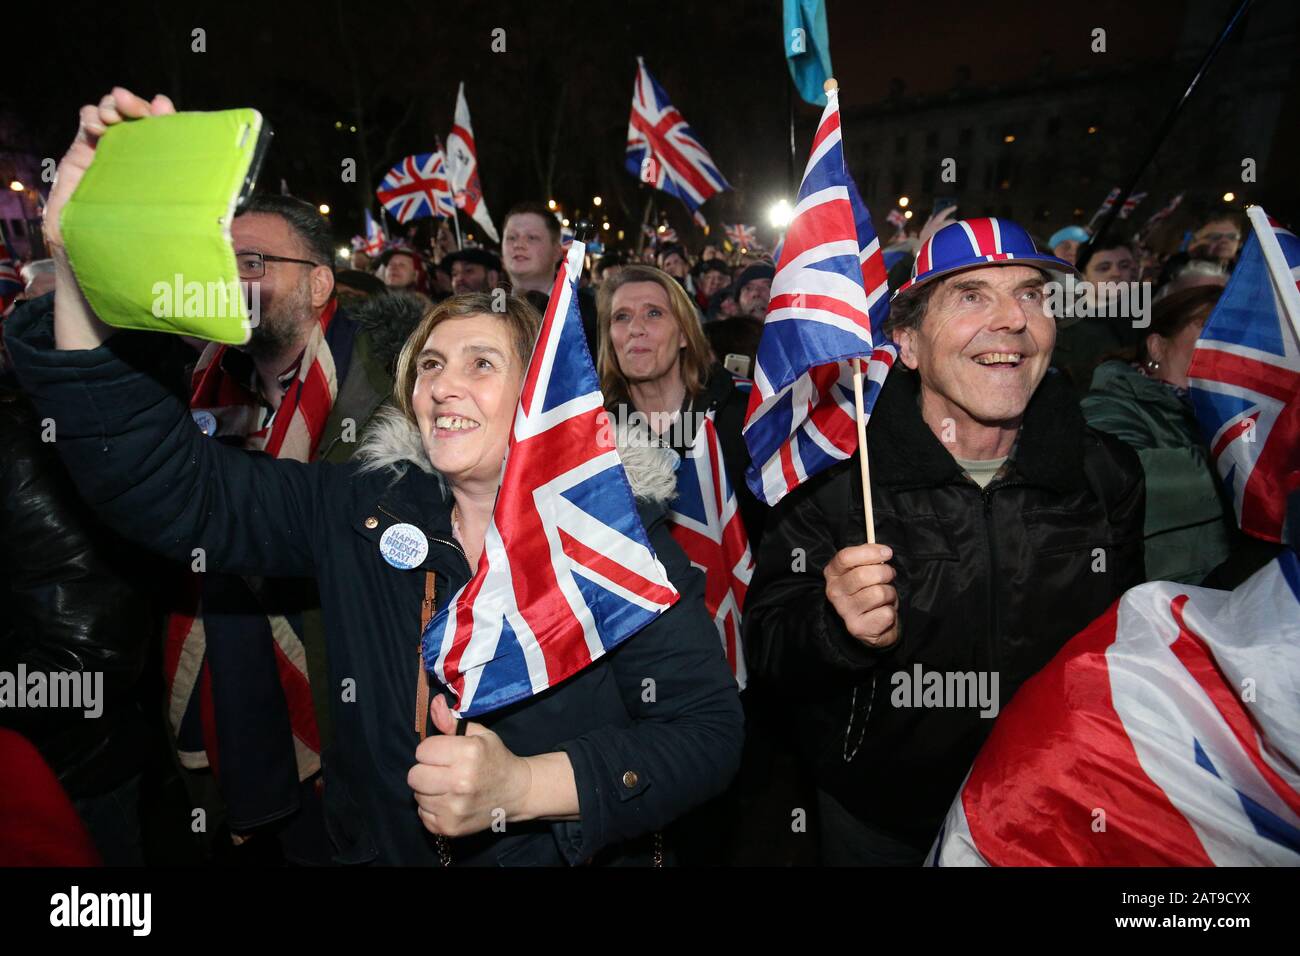 Pro-Brexit supporters in Parliament Square, London, as the UK prepares to leave the European Union, ending 47 years of close and sometimes uncomfortable ties to Brussels. Stock Photo